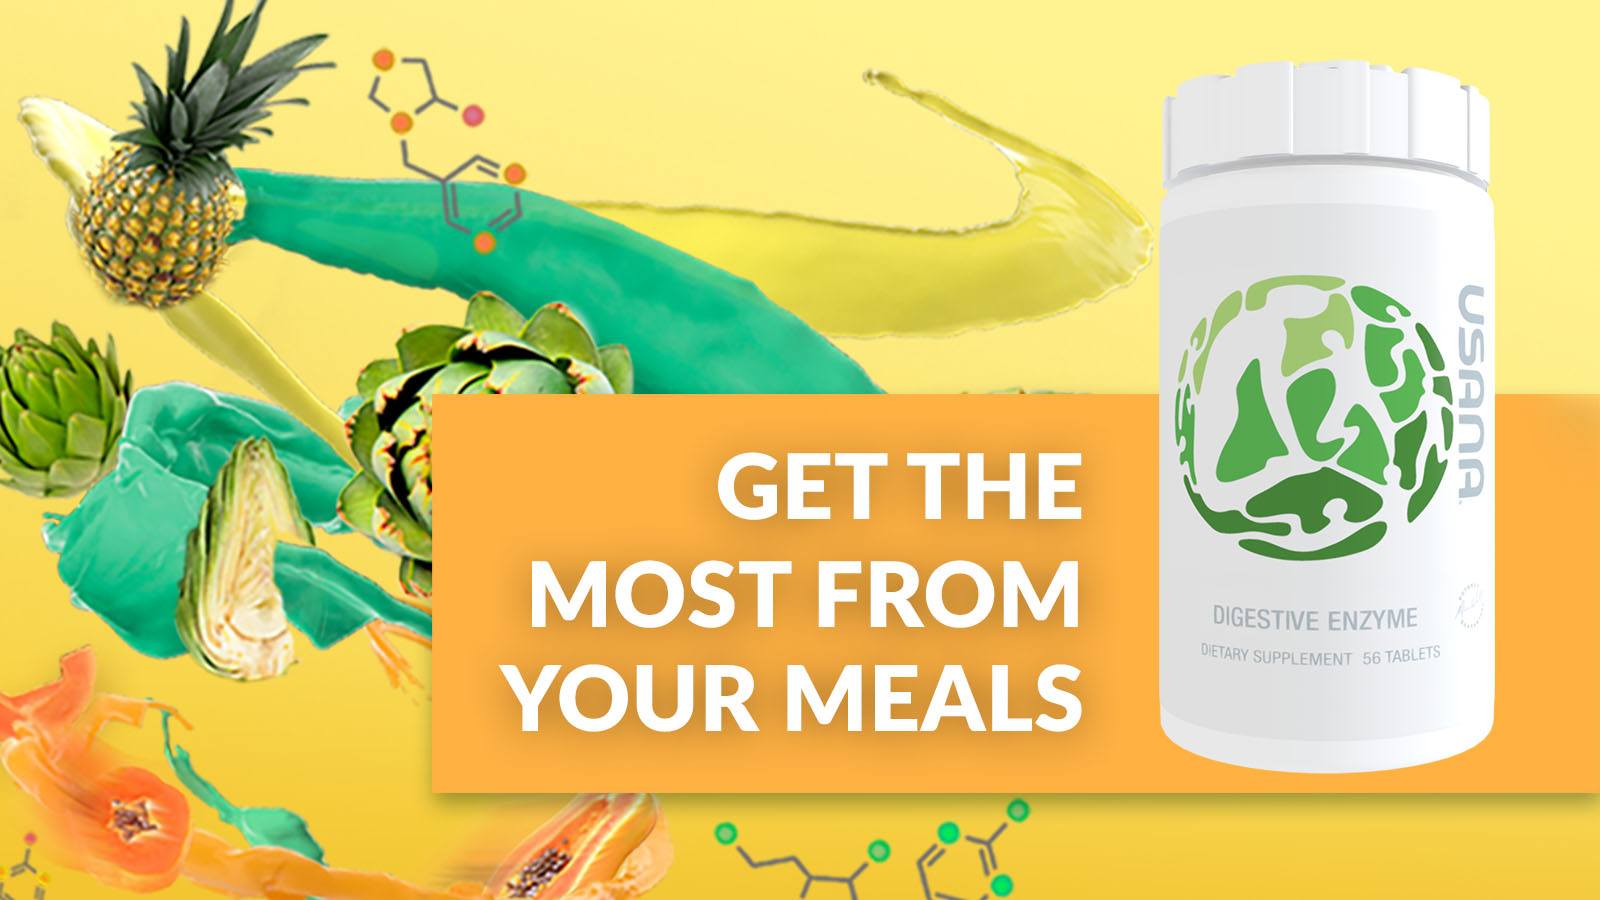 Trust Your Gut with Digestive Enzyme What's Up, USANA?